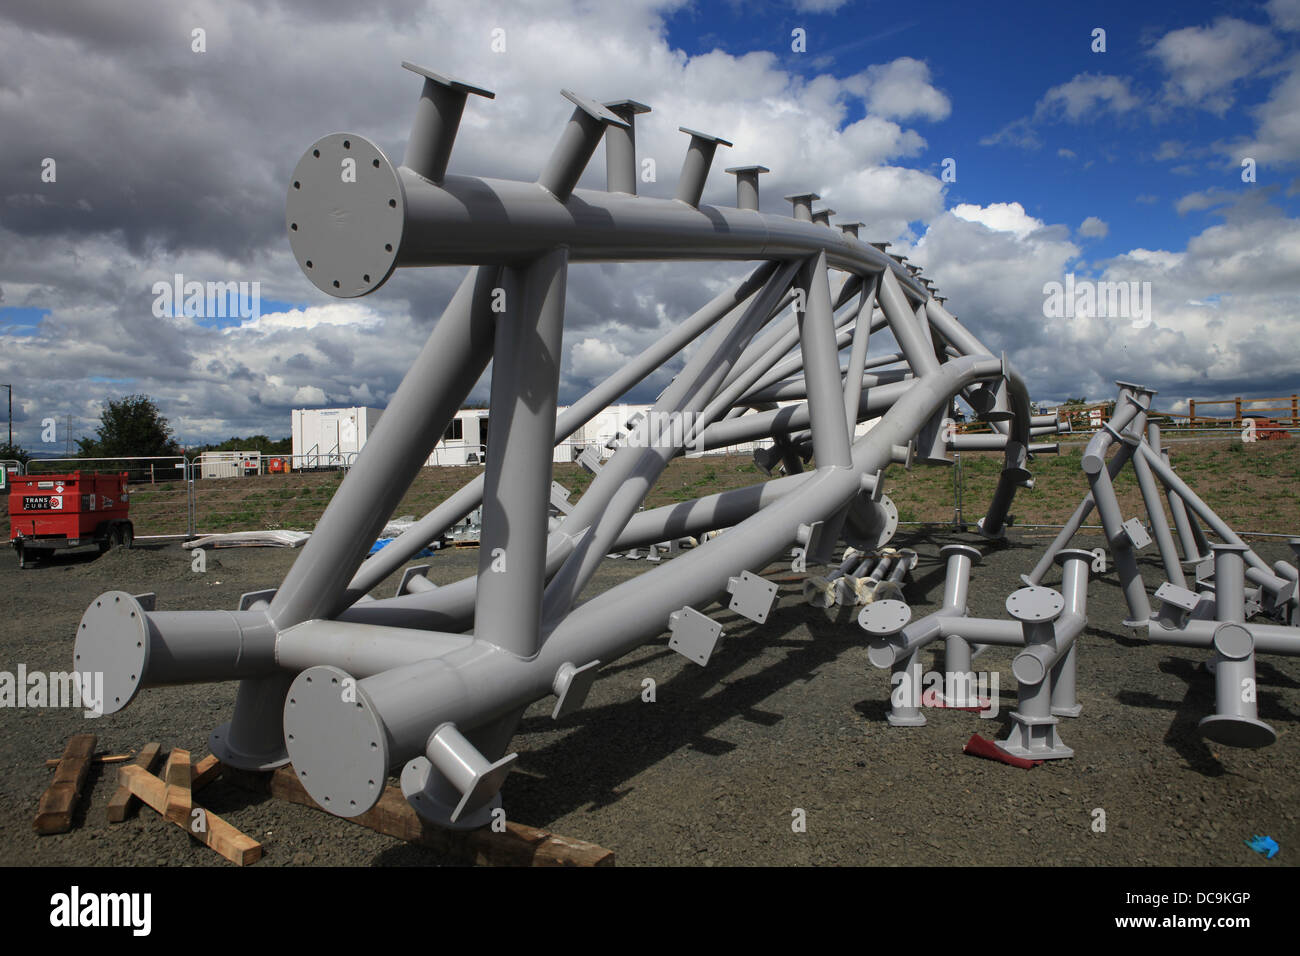 Steelwork on a construction site. Part of the Kelpie Helix project Falkirk Scotland. Stock Photo